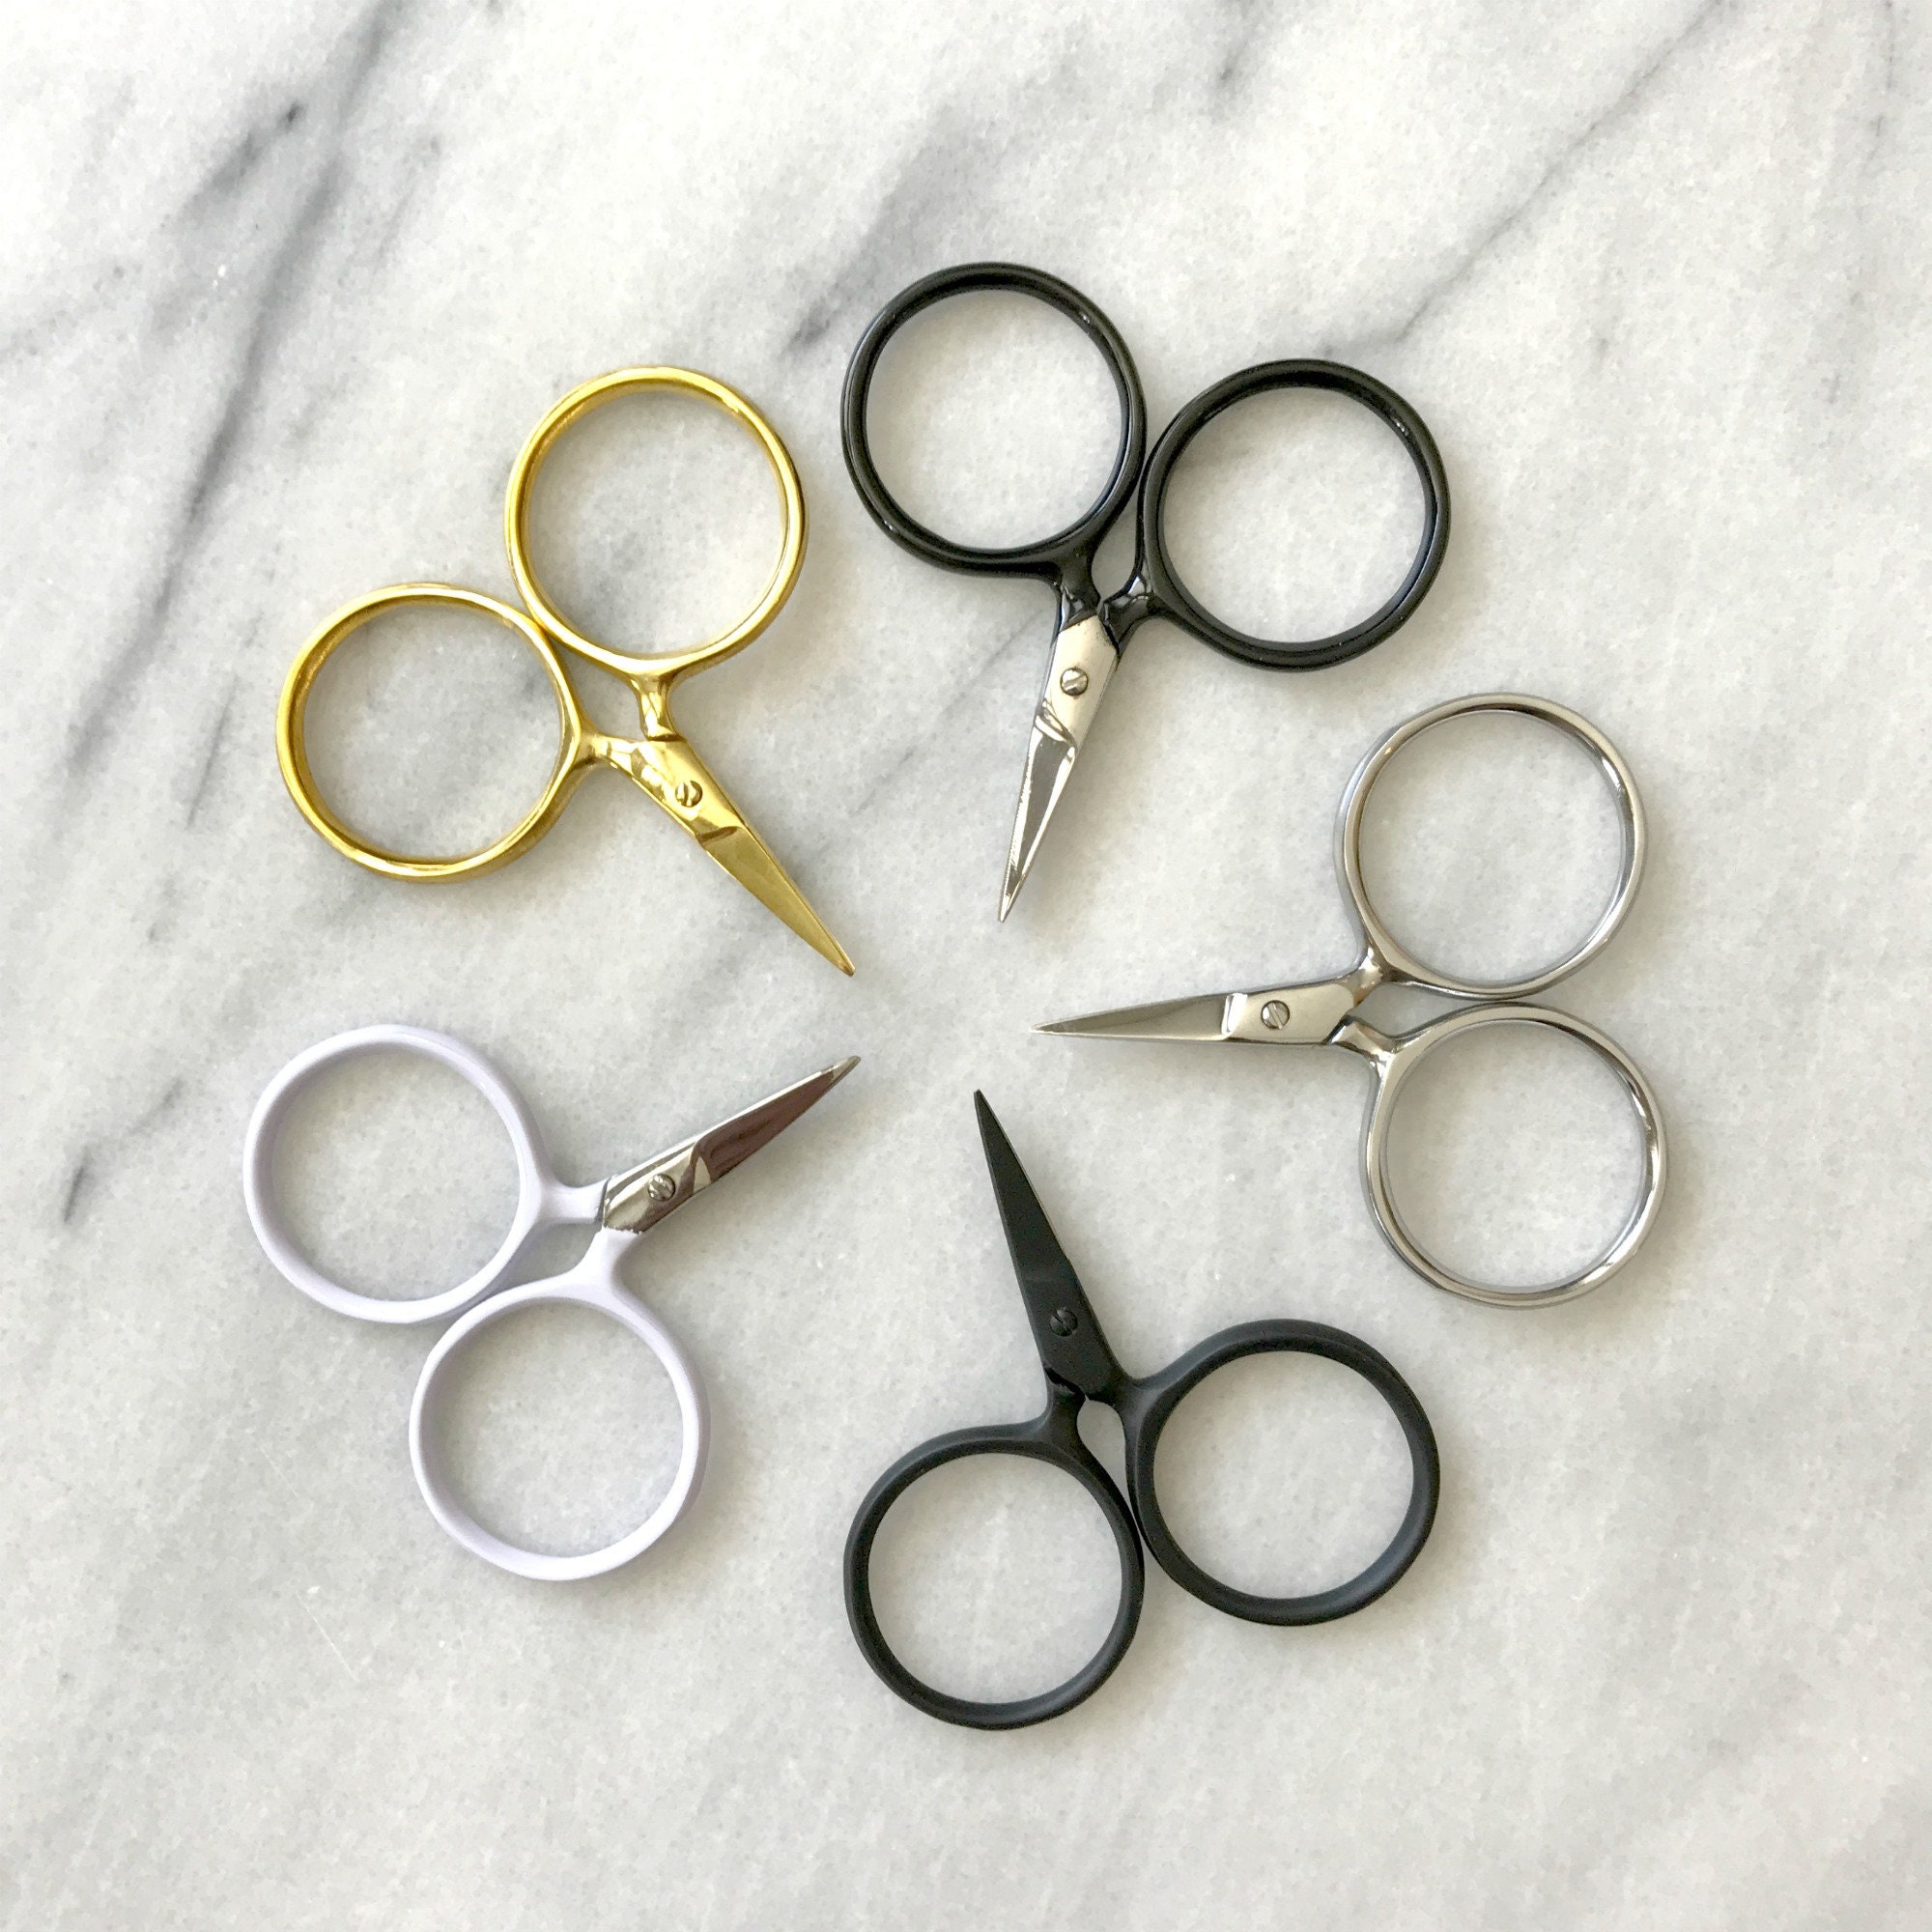 Small Black Embroidery Scissors With Round Circular Handles, Sewing Scissors,  Snips 